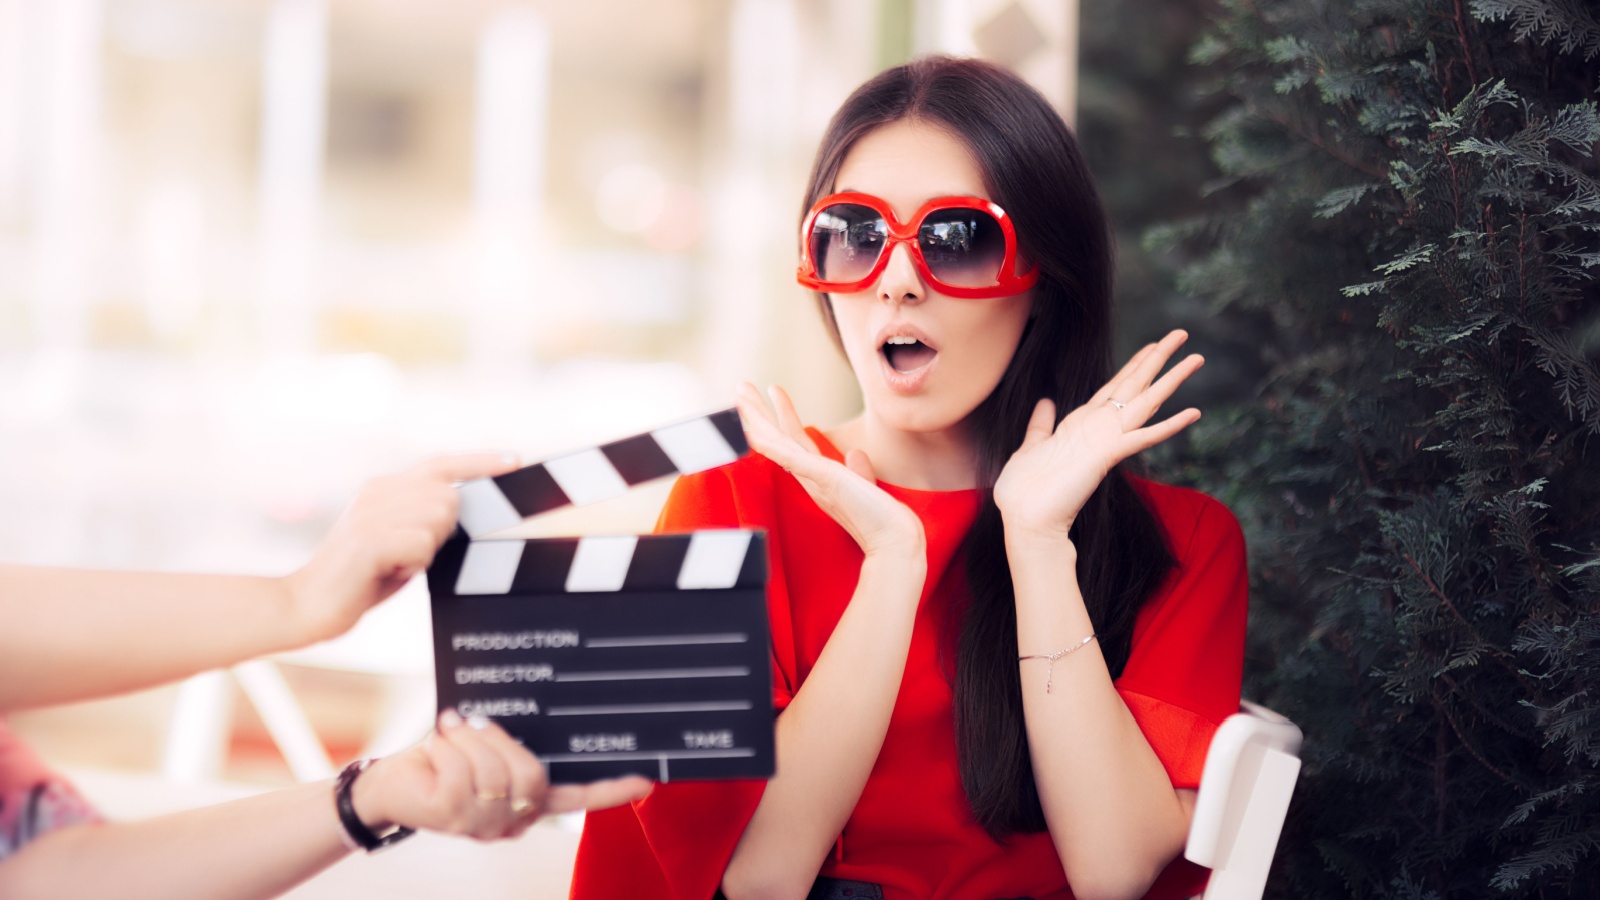 Surprised Actress with Oversized Sunglasses Shooting Movie Scene - Diva in red dress and big shades starring in an artistic film